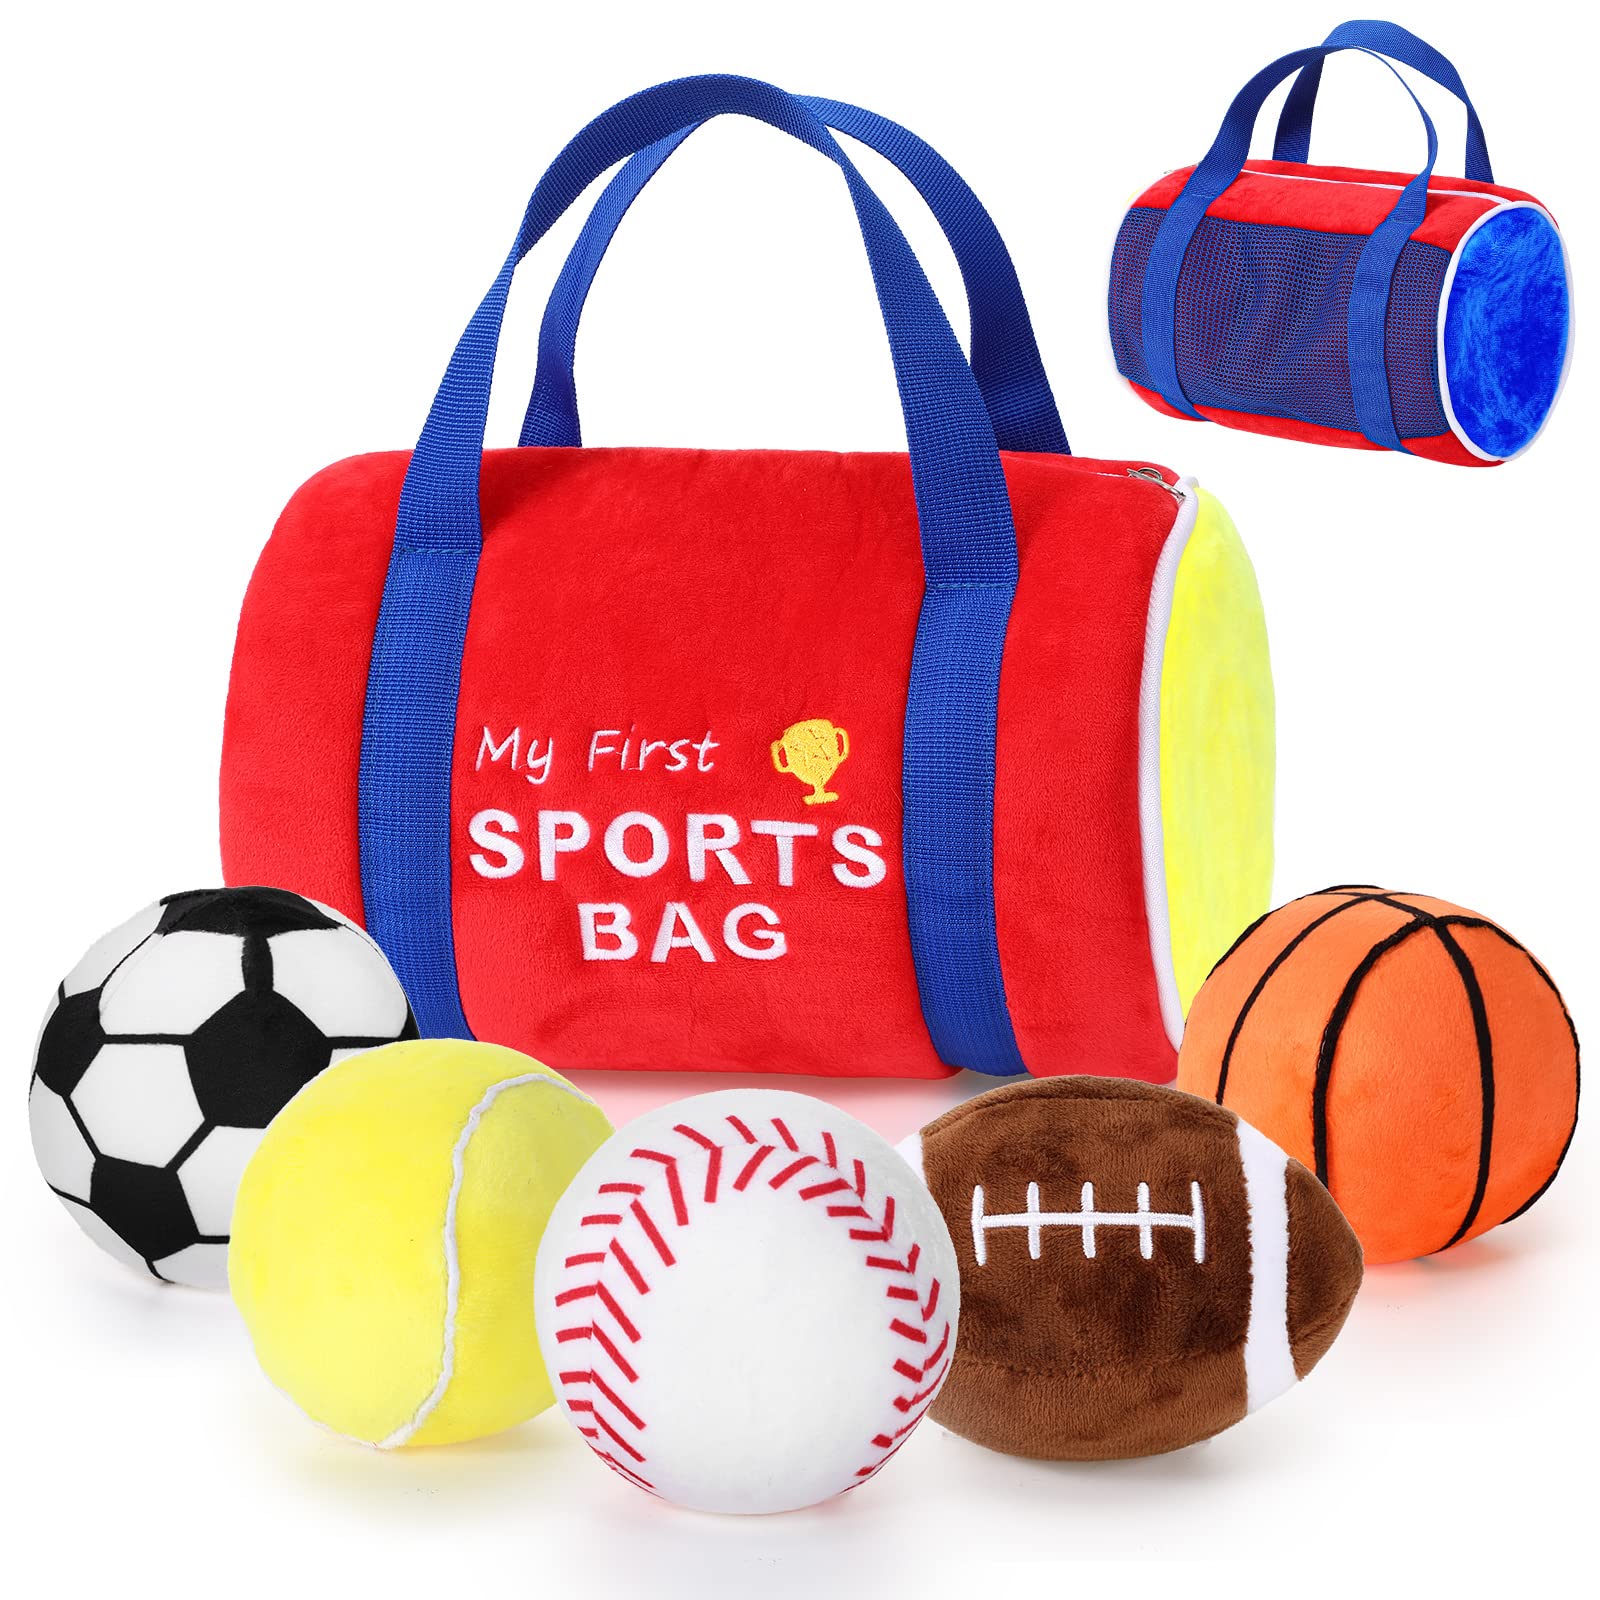 Skylety 6 Pieces My Soft Sports Bag Stuffed Plush with Sound Playset Stuffed Plush Soccer Ball, Basketball, Tennis, Baseball, Football for Little Teenager Party Favor Sports Game